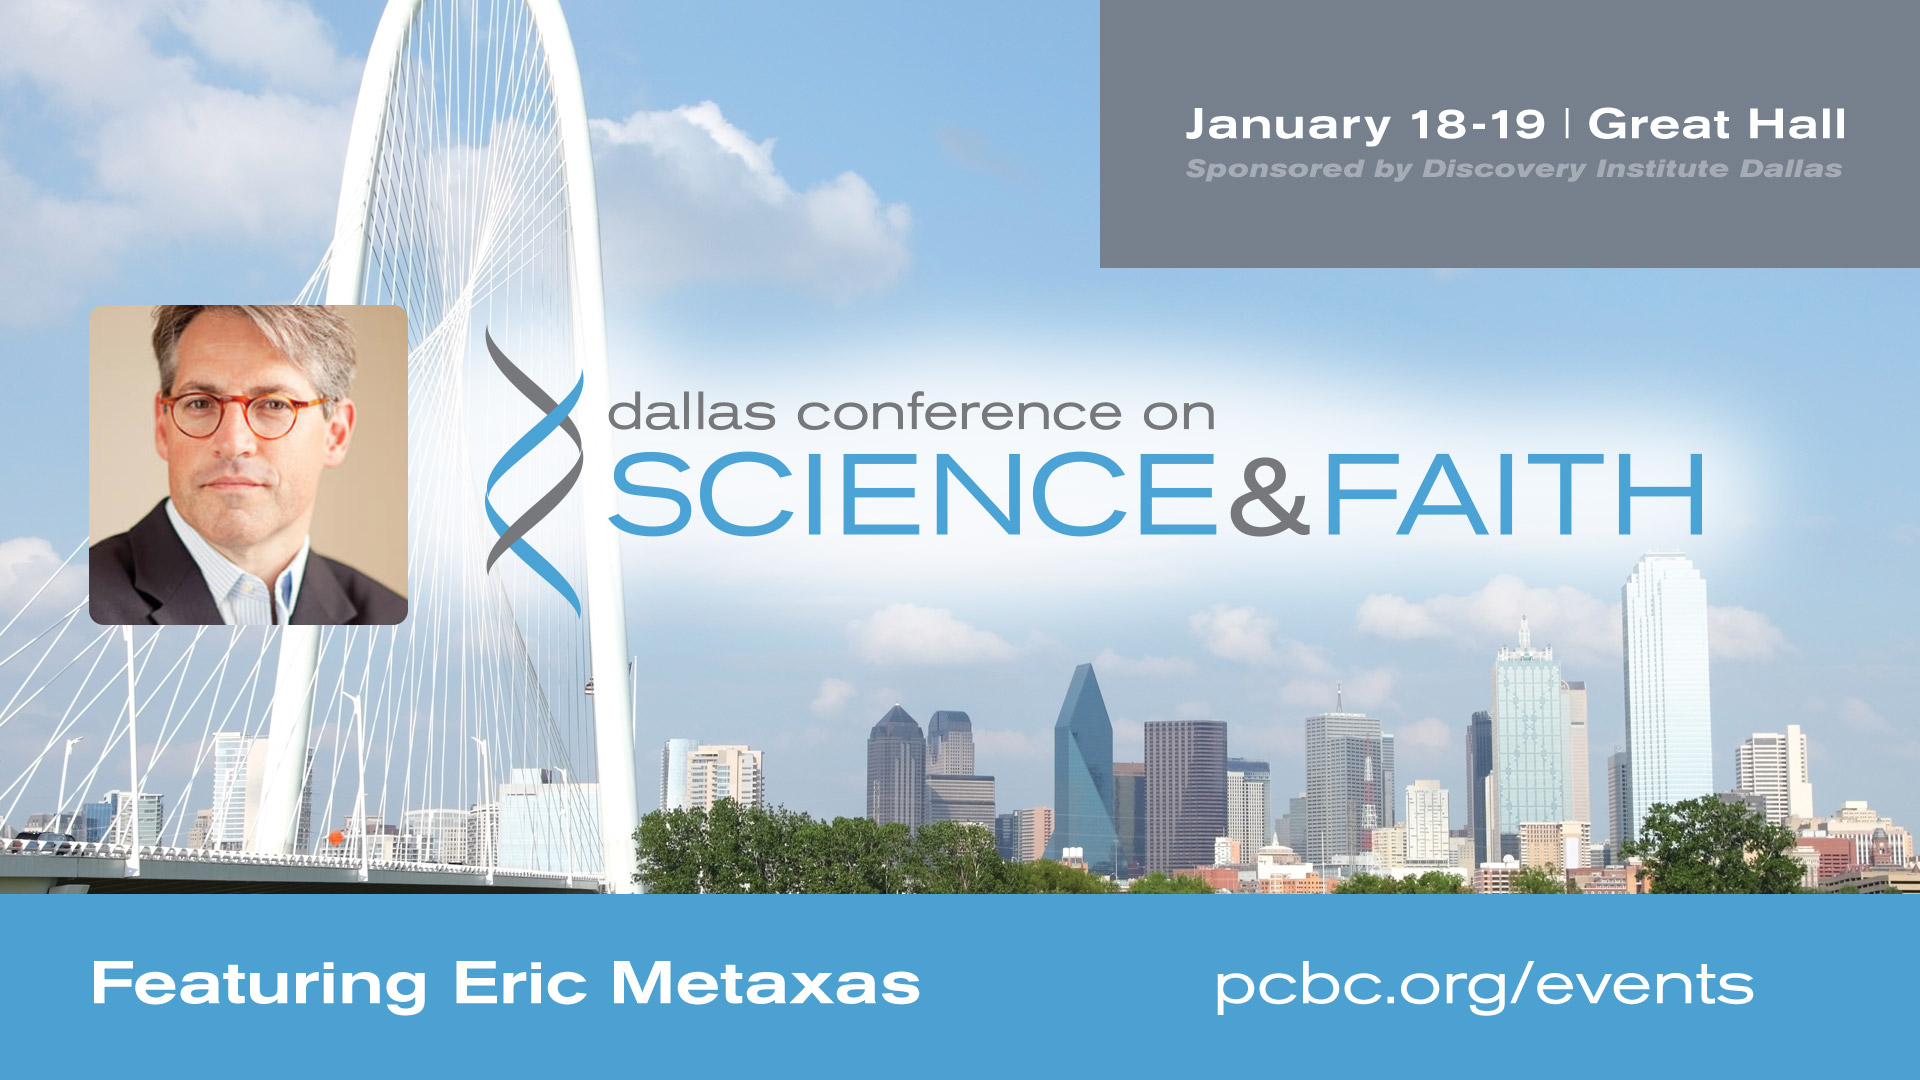 Dallas Conference on Science & Faith